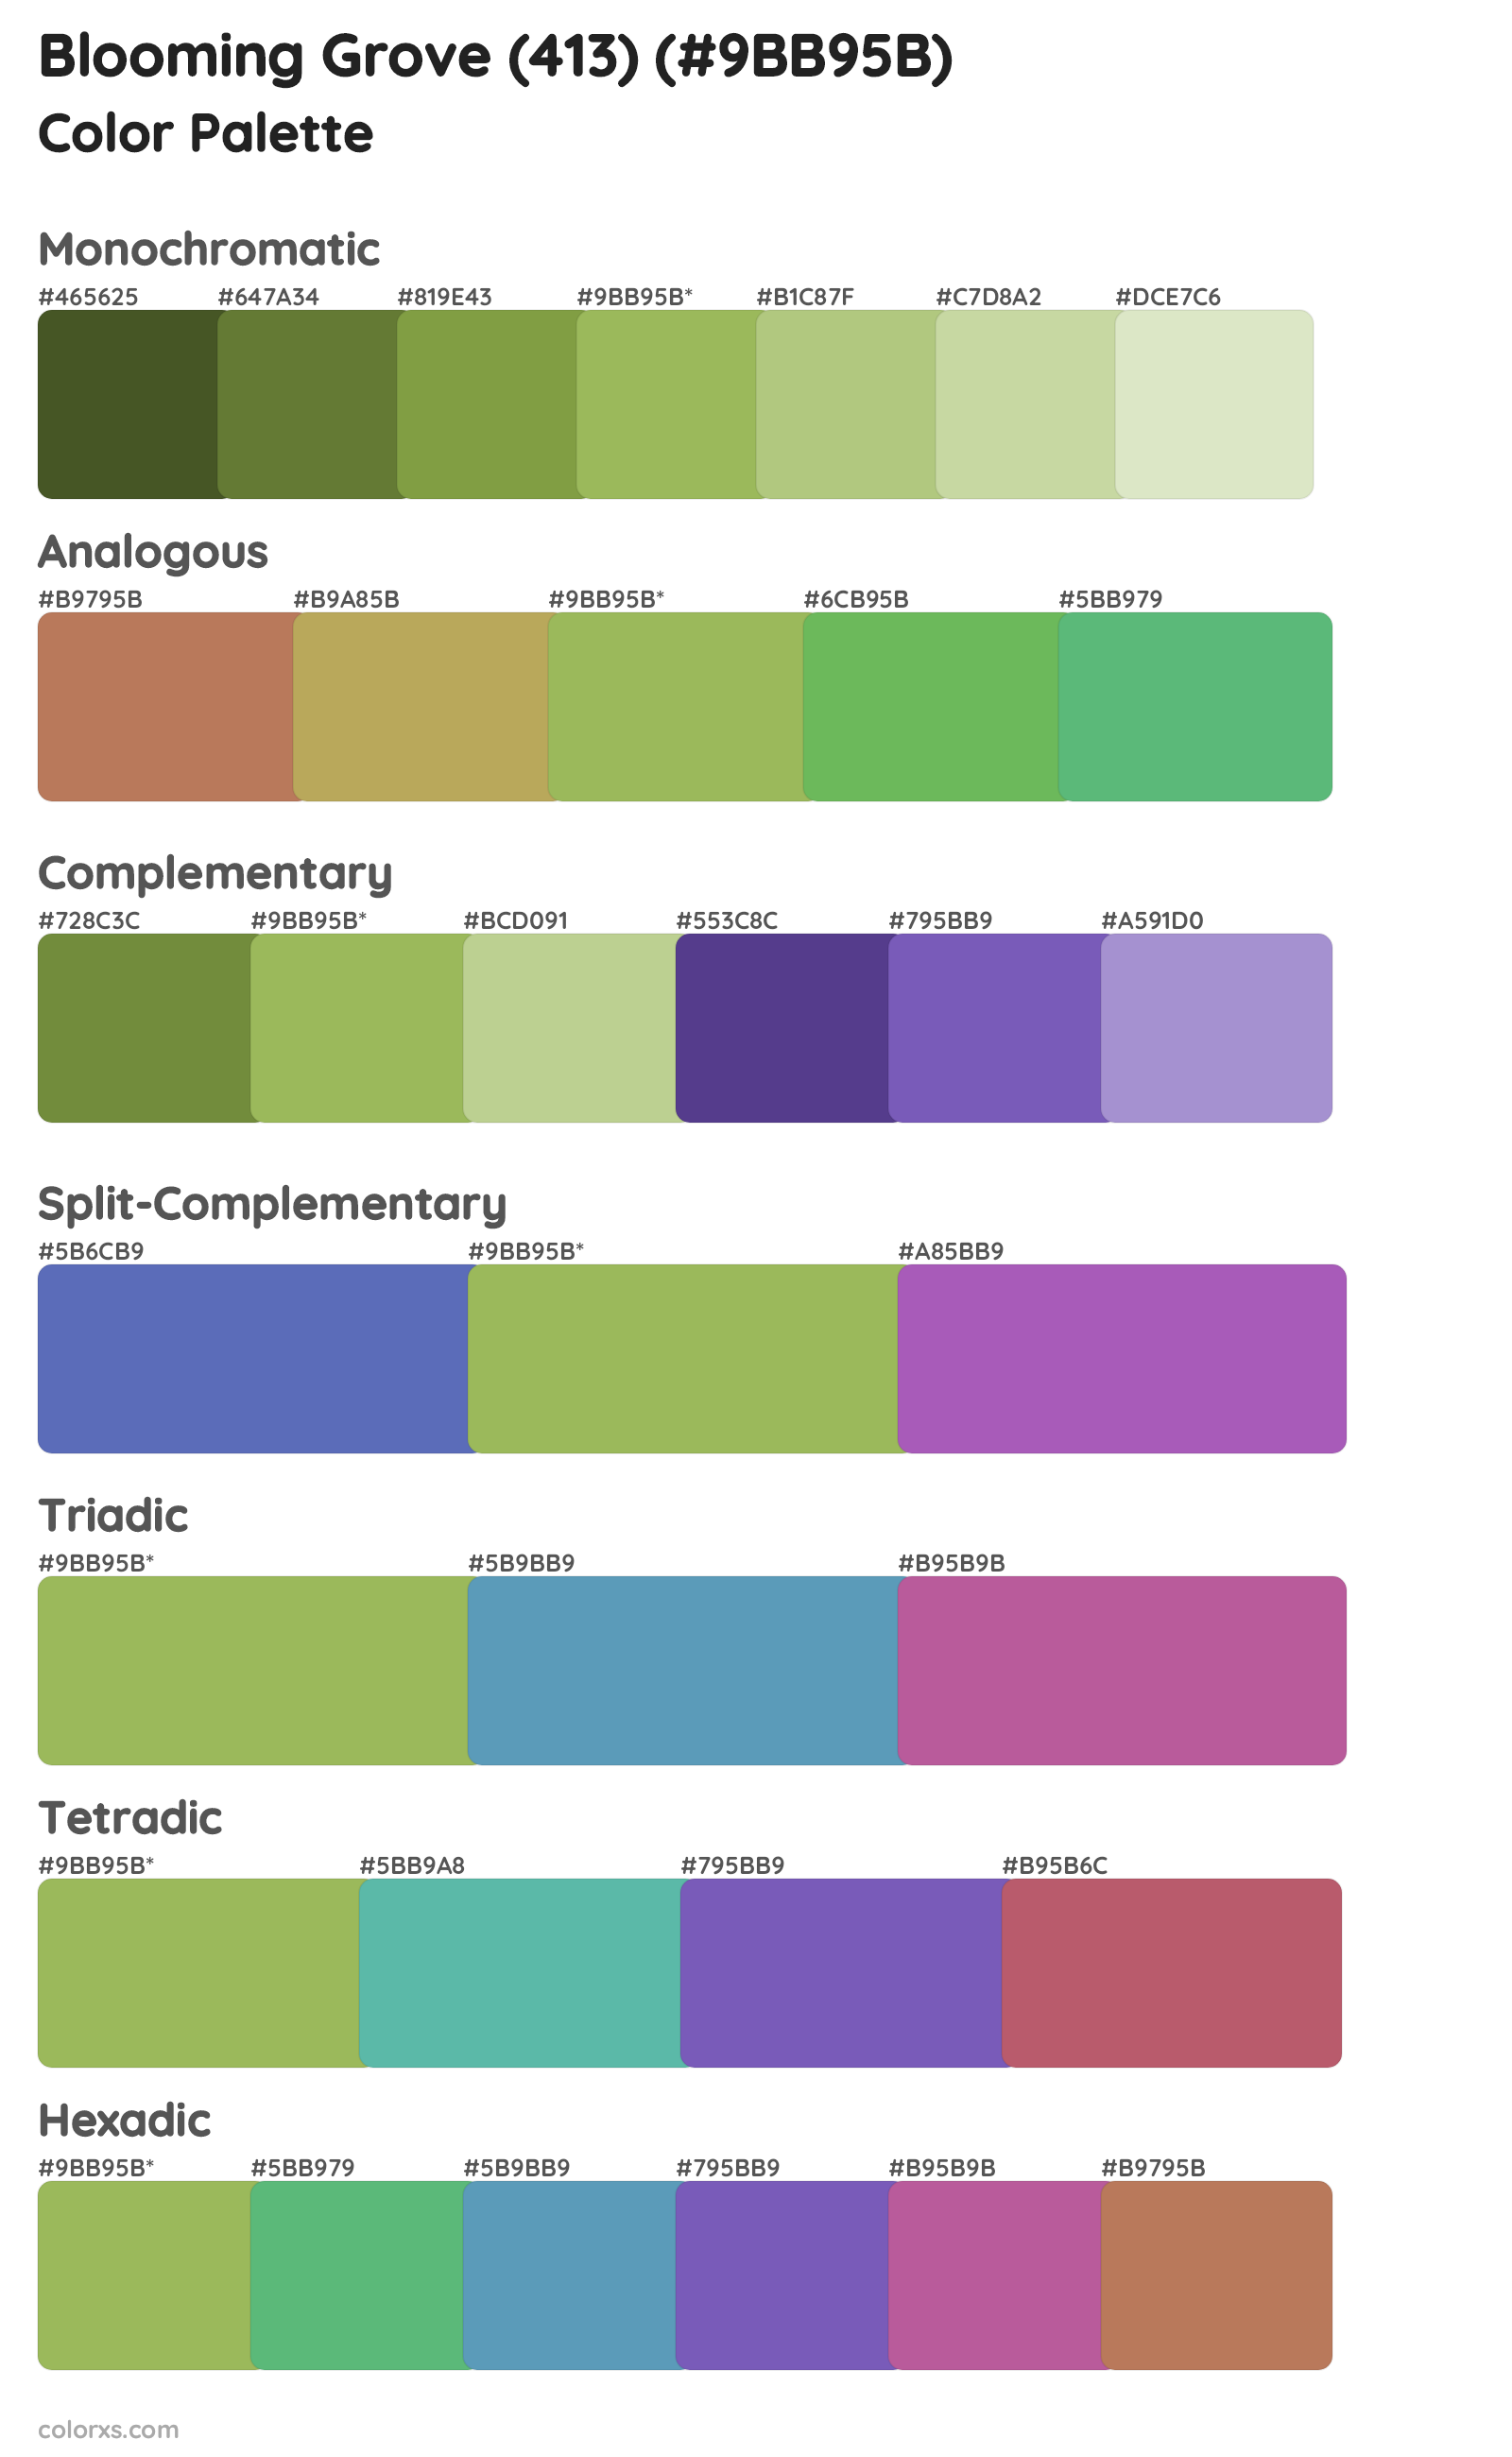 Blooming Grove (413) Color Scheme Palettes